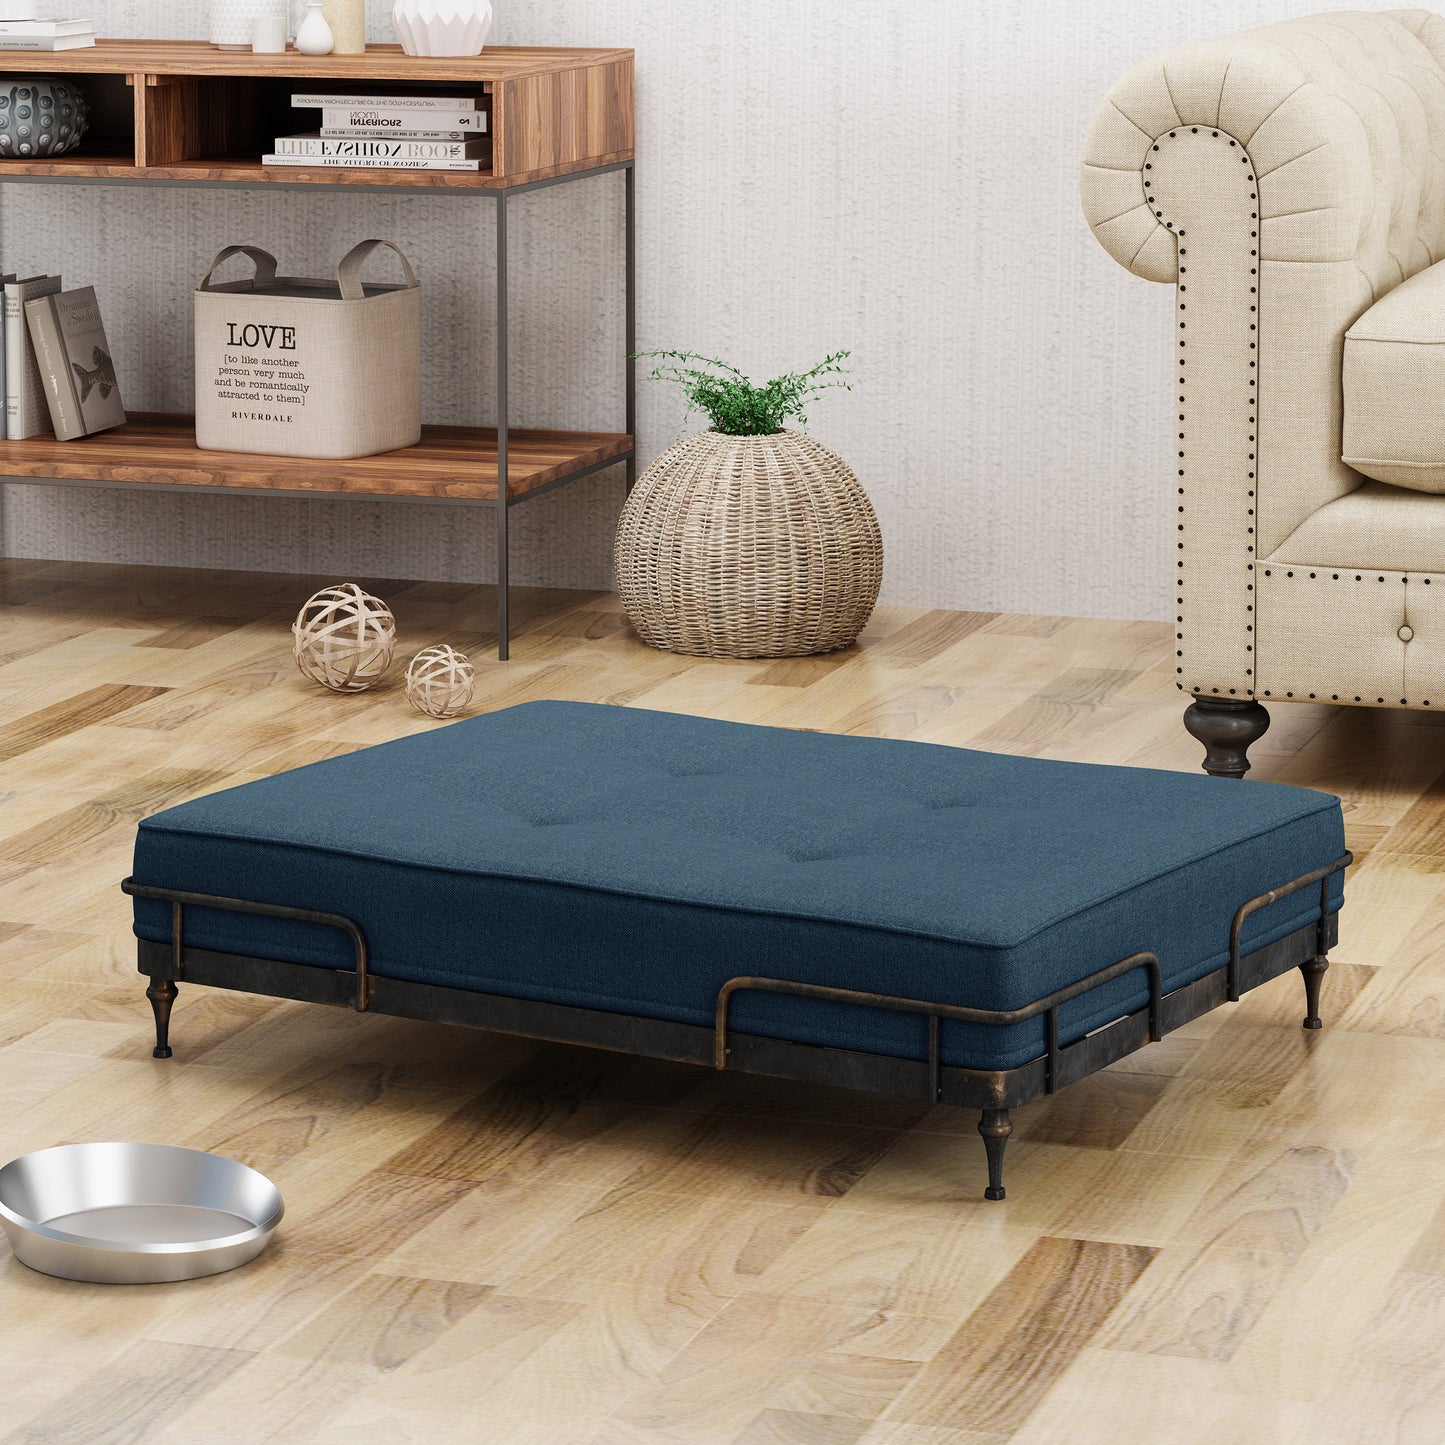 Elvis Industrial Pet Bed, Dark Gray and Brushed Gray